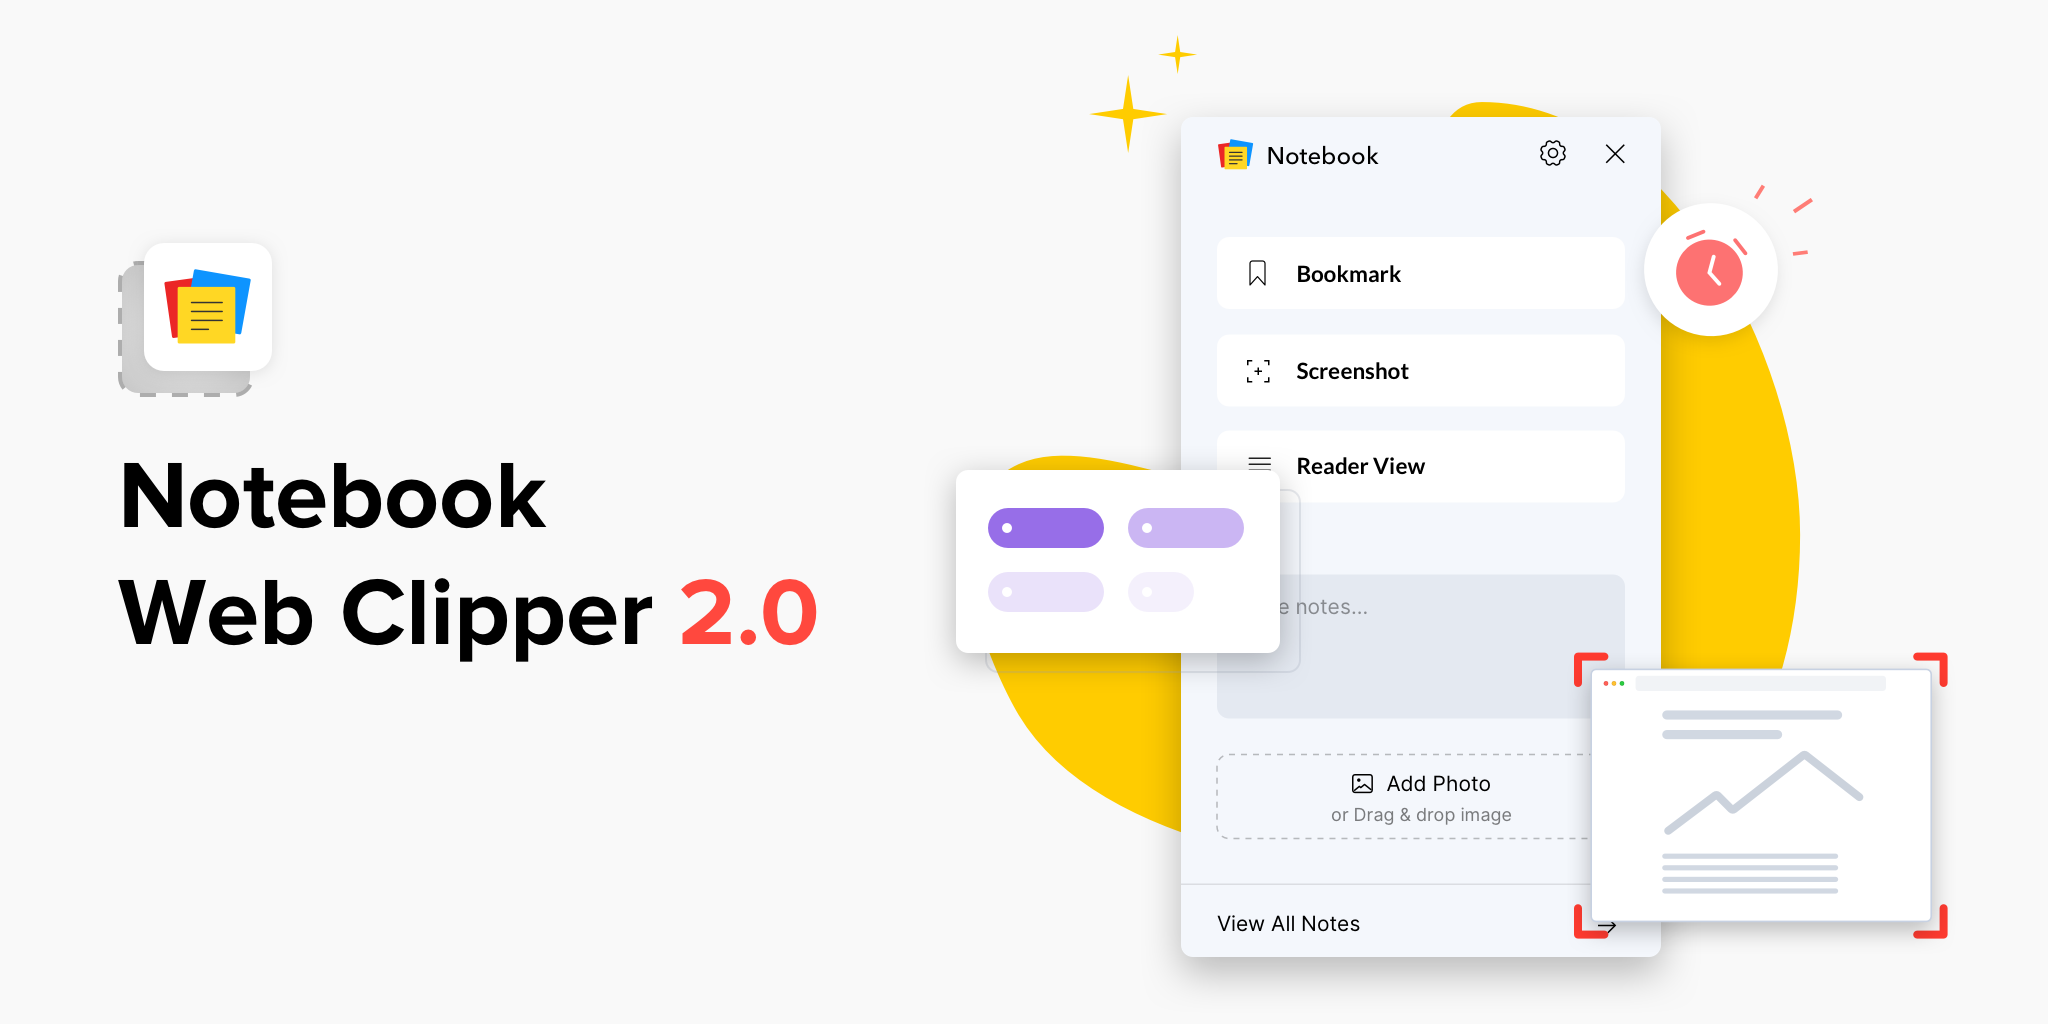 What's new in Notebook Web Clipper